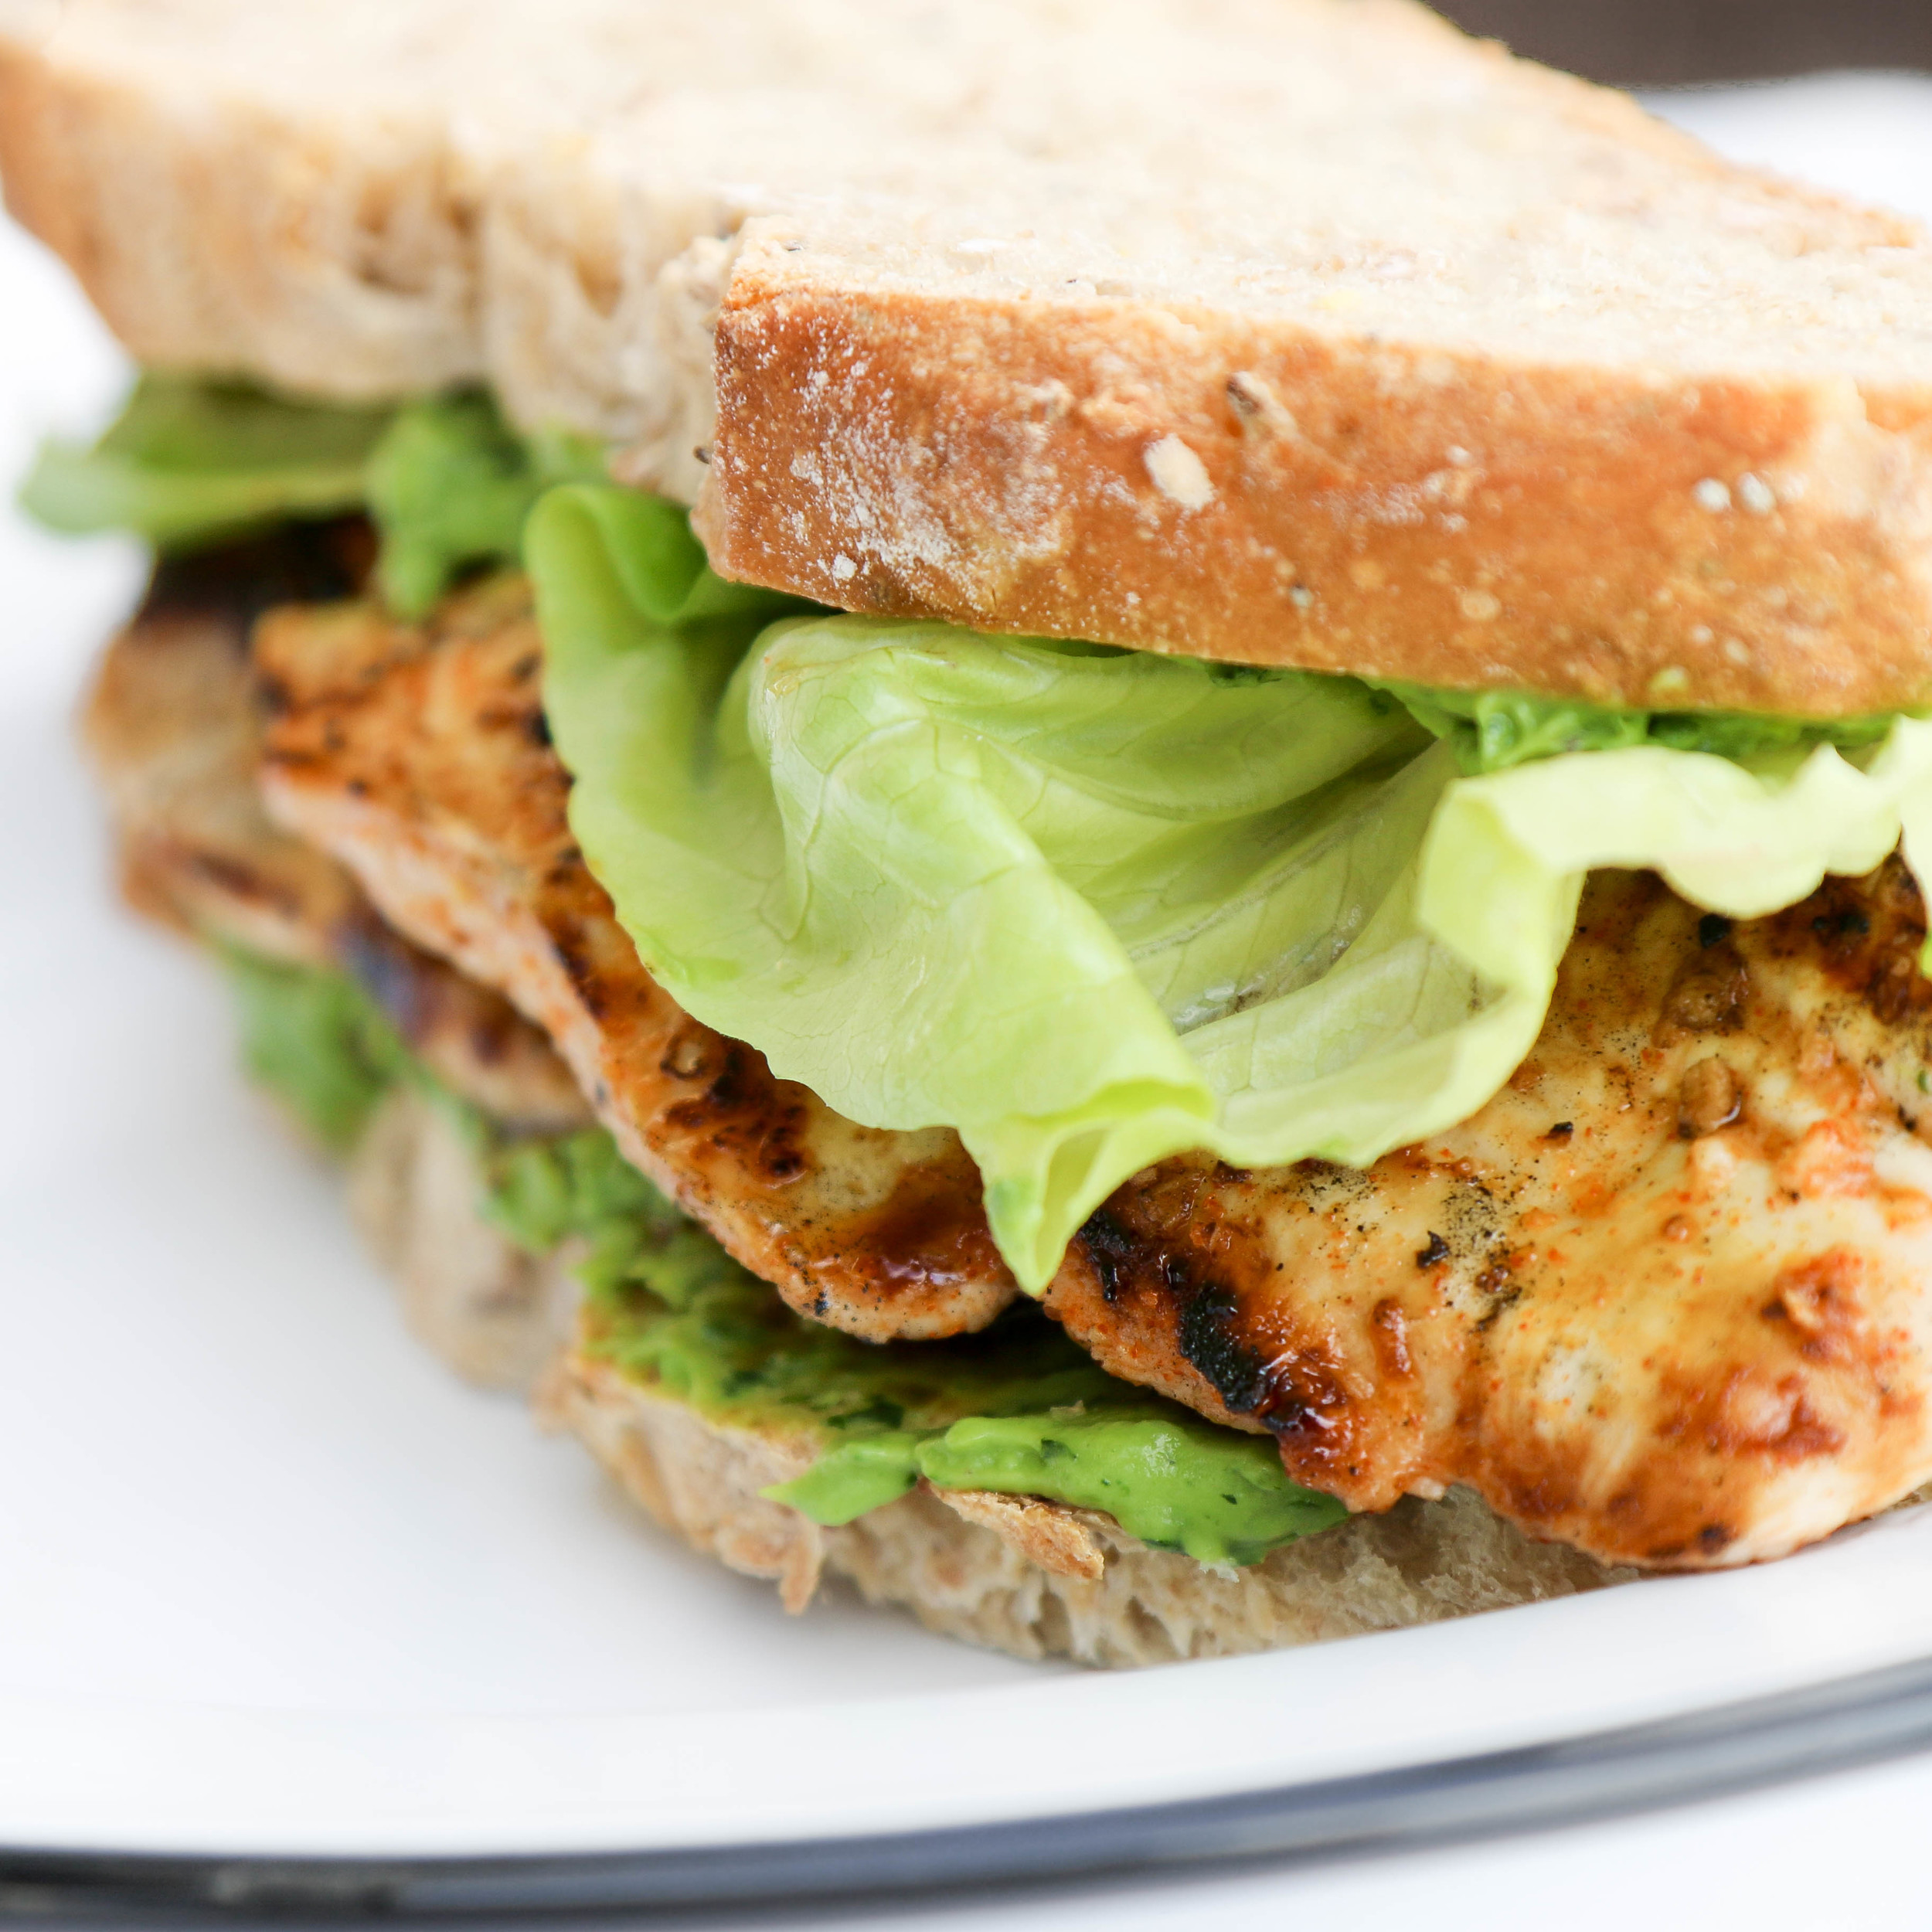 The Hungry Hounds Grilled Chicken Sandwich With Avocado Herb Spread